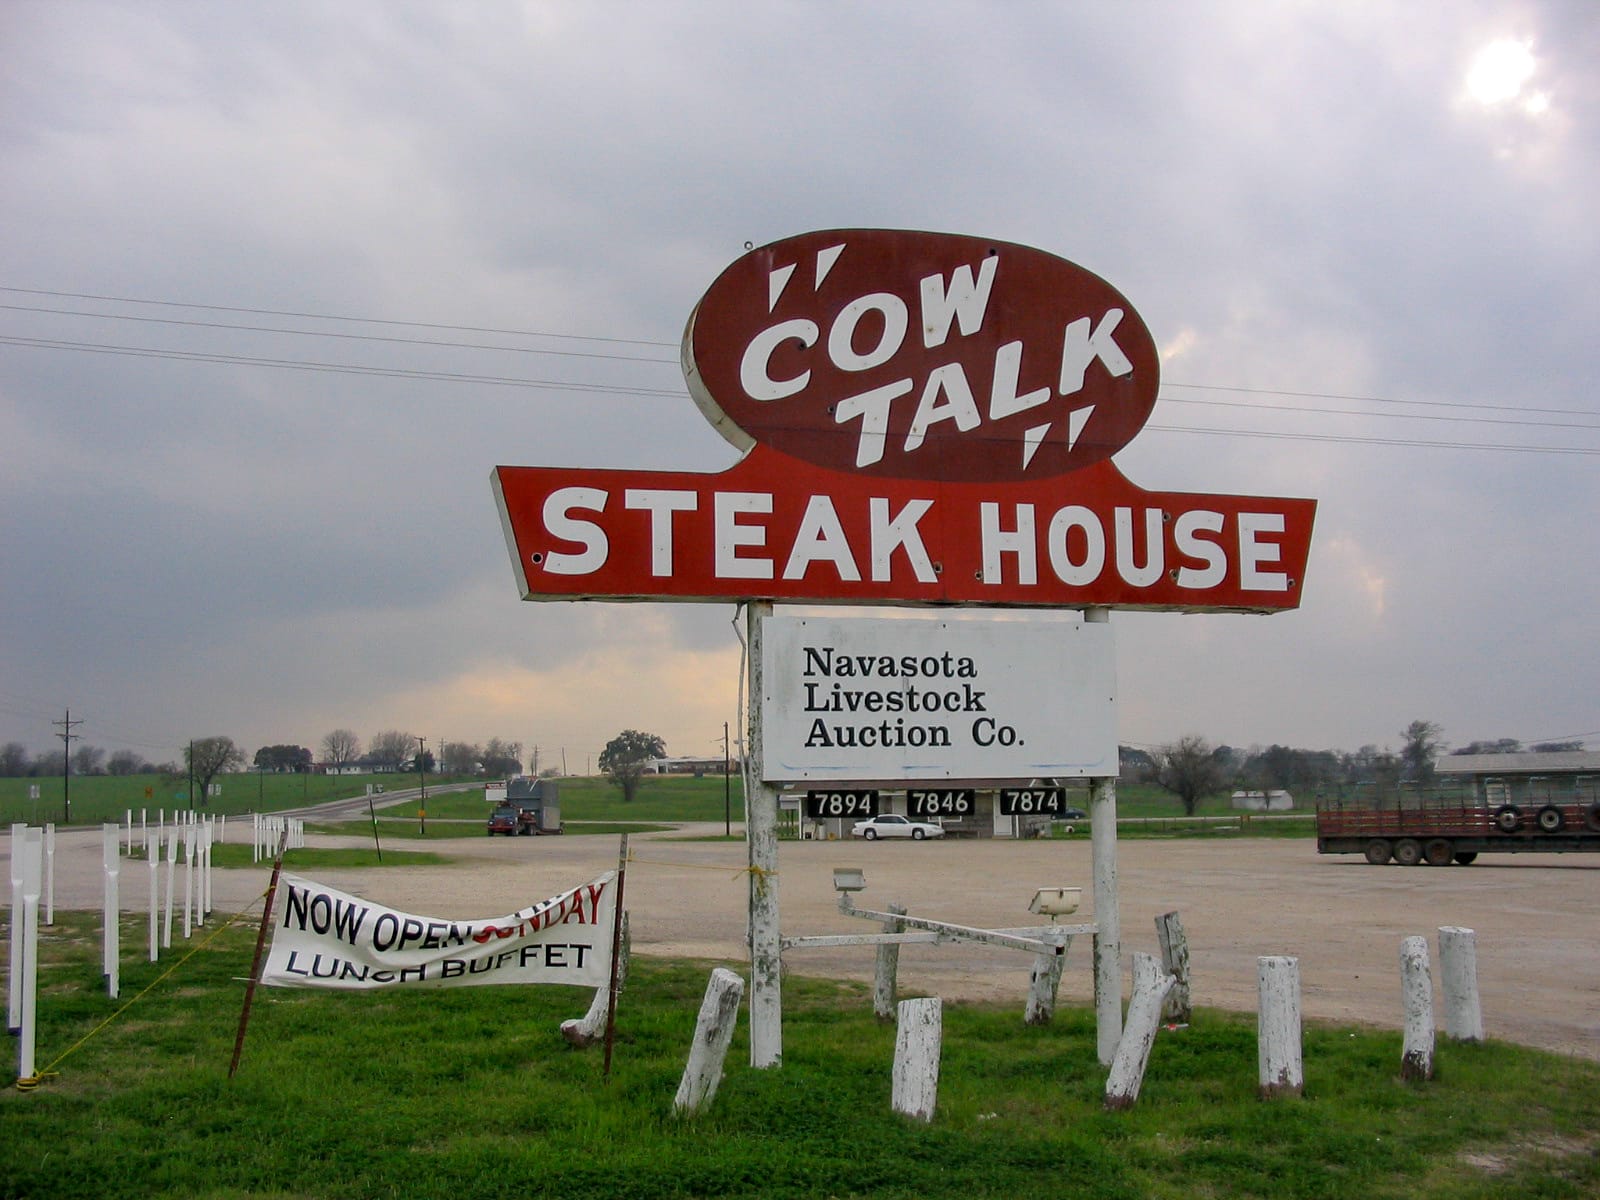 Steaks and auctions are what these folks live for